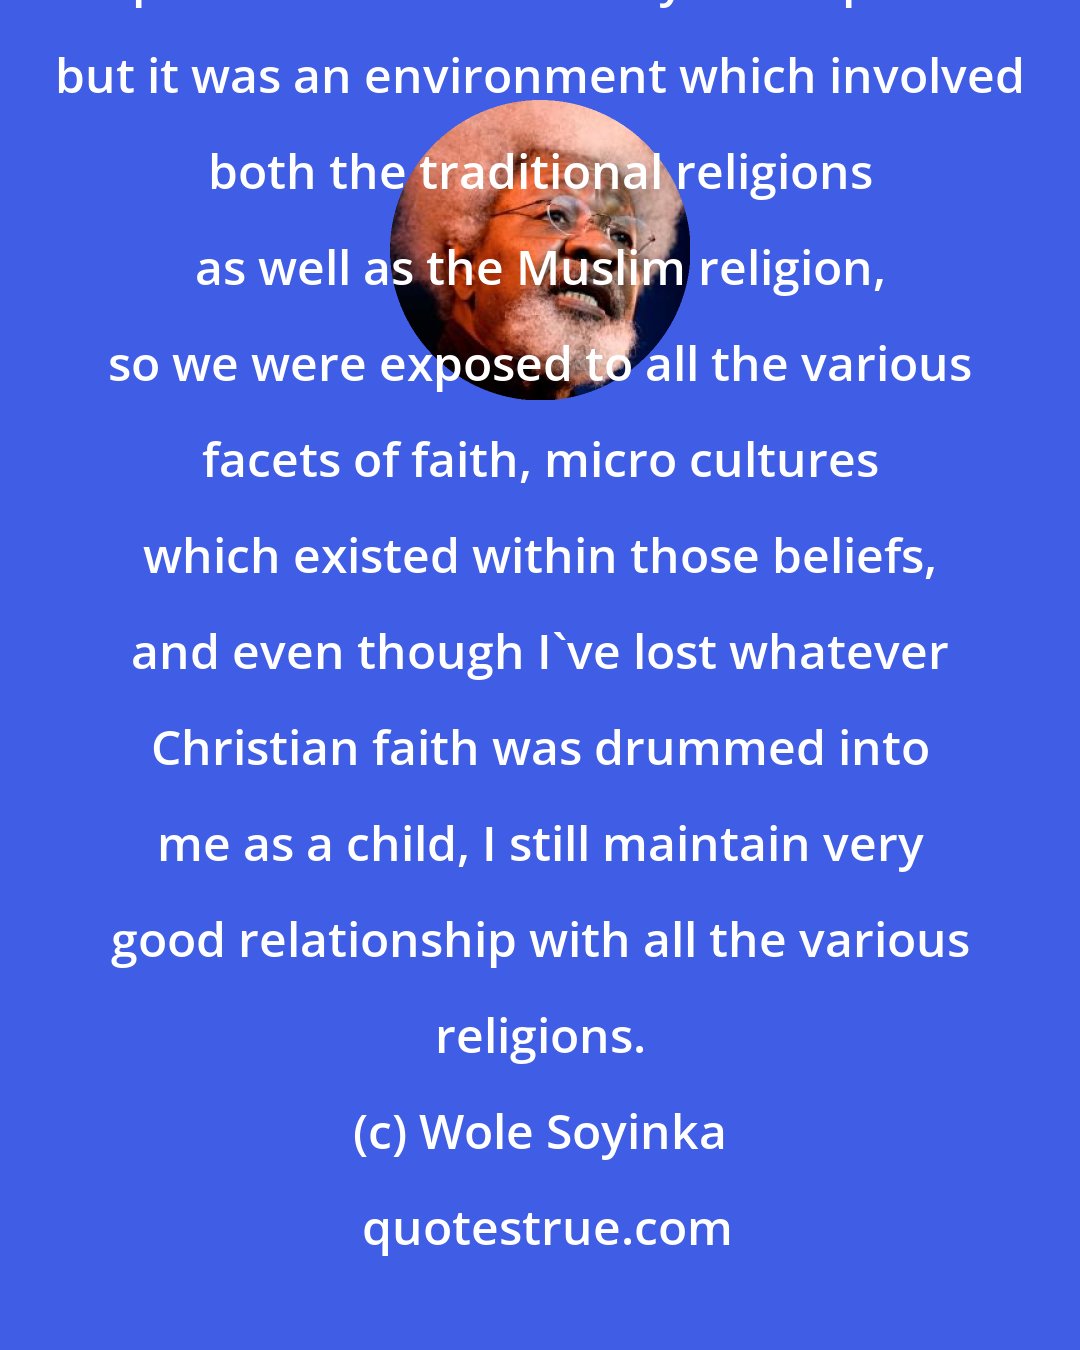 Wole Soyinka: I was born into a Christian household, in a parsonage in fact, so I grew up in sort of a missionary atmosphere but it was an environment which involved both the traditional religions as well as the Muslim religion, so we were exposed to all the various facets of faith, micro cultures which existed within those beliefs, and even though I've lost whatever Christian faith was drummed into me as a child, I still maintain very good relationship with all the various religions.